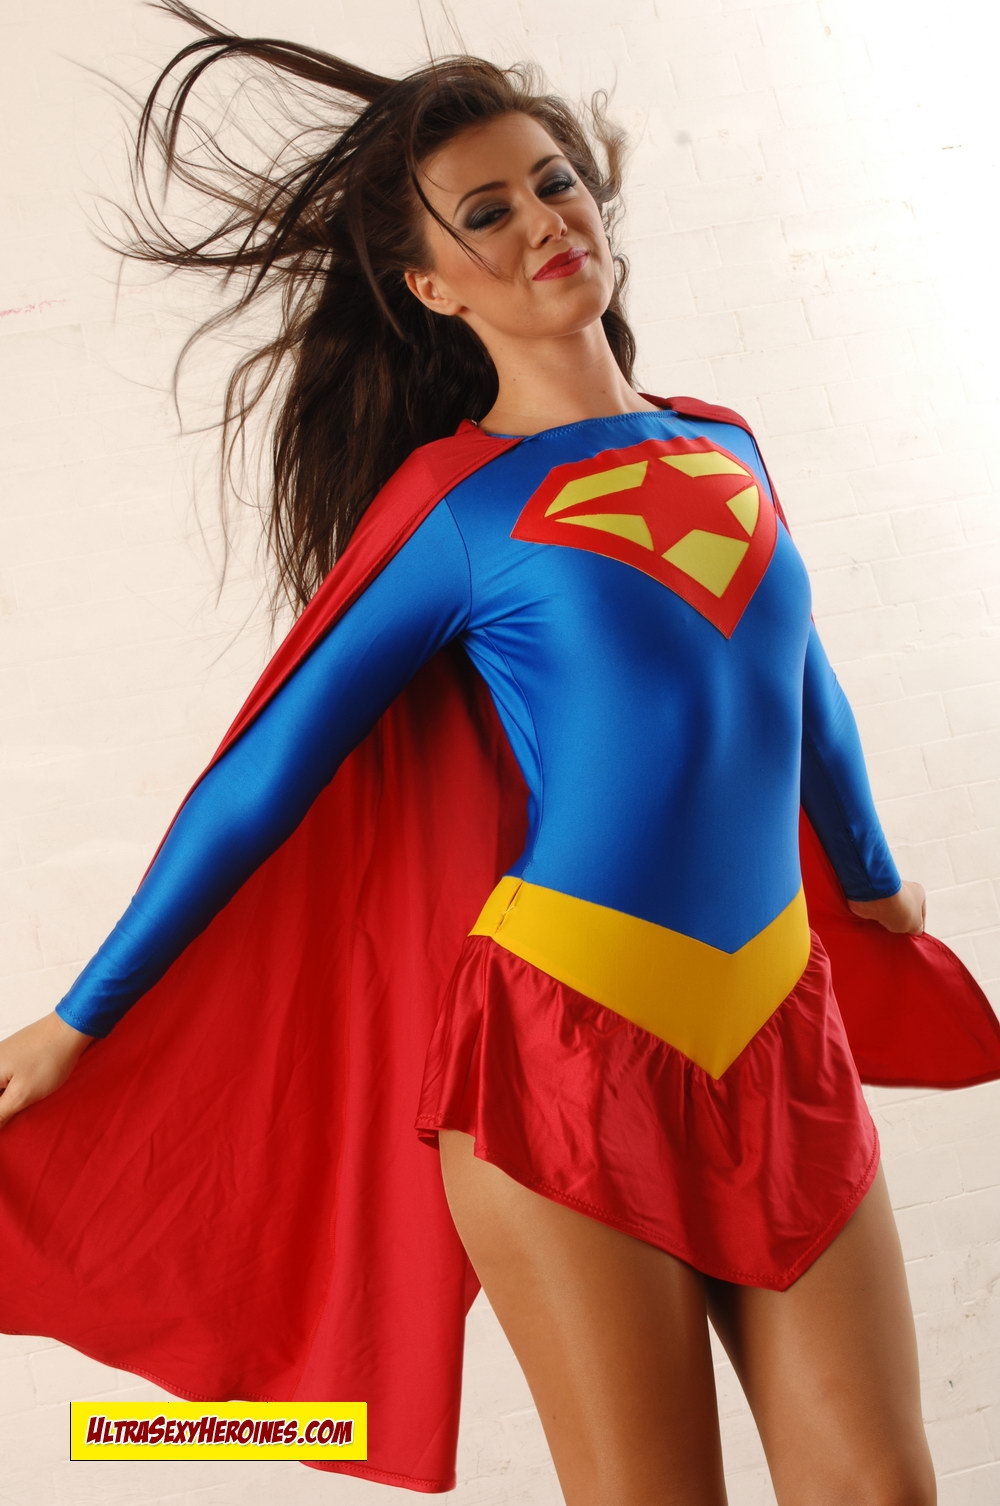 [UltraSexyHeroines] Super Heroine Cosplay Nude - Holly 68